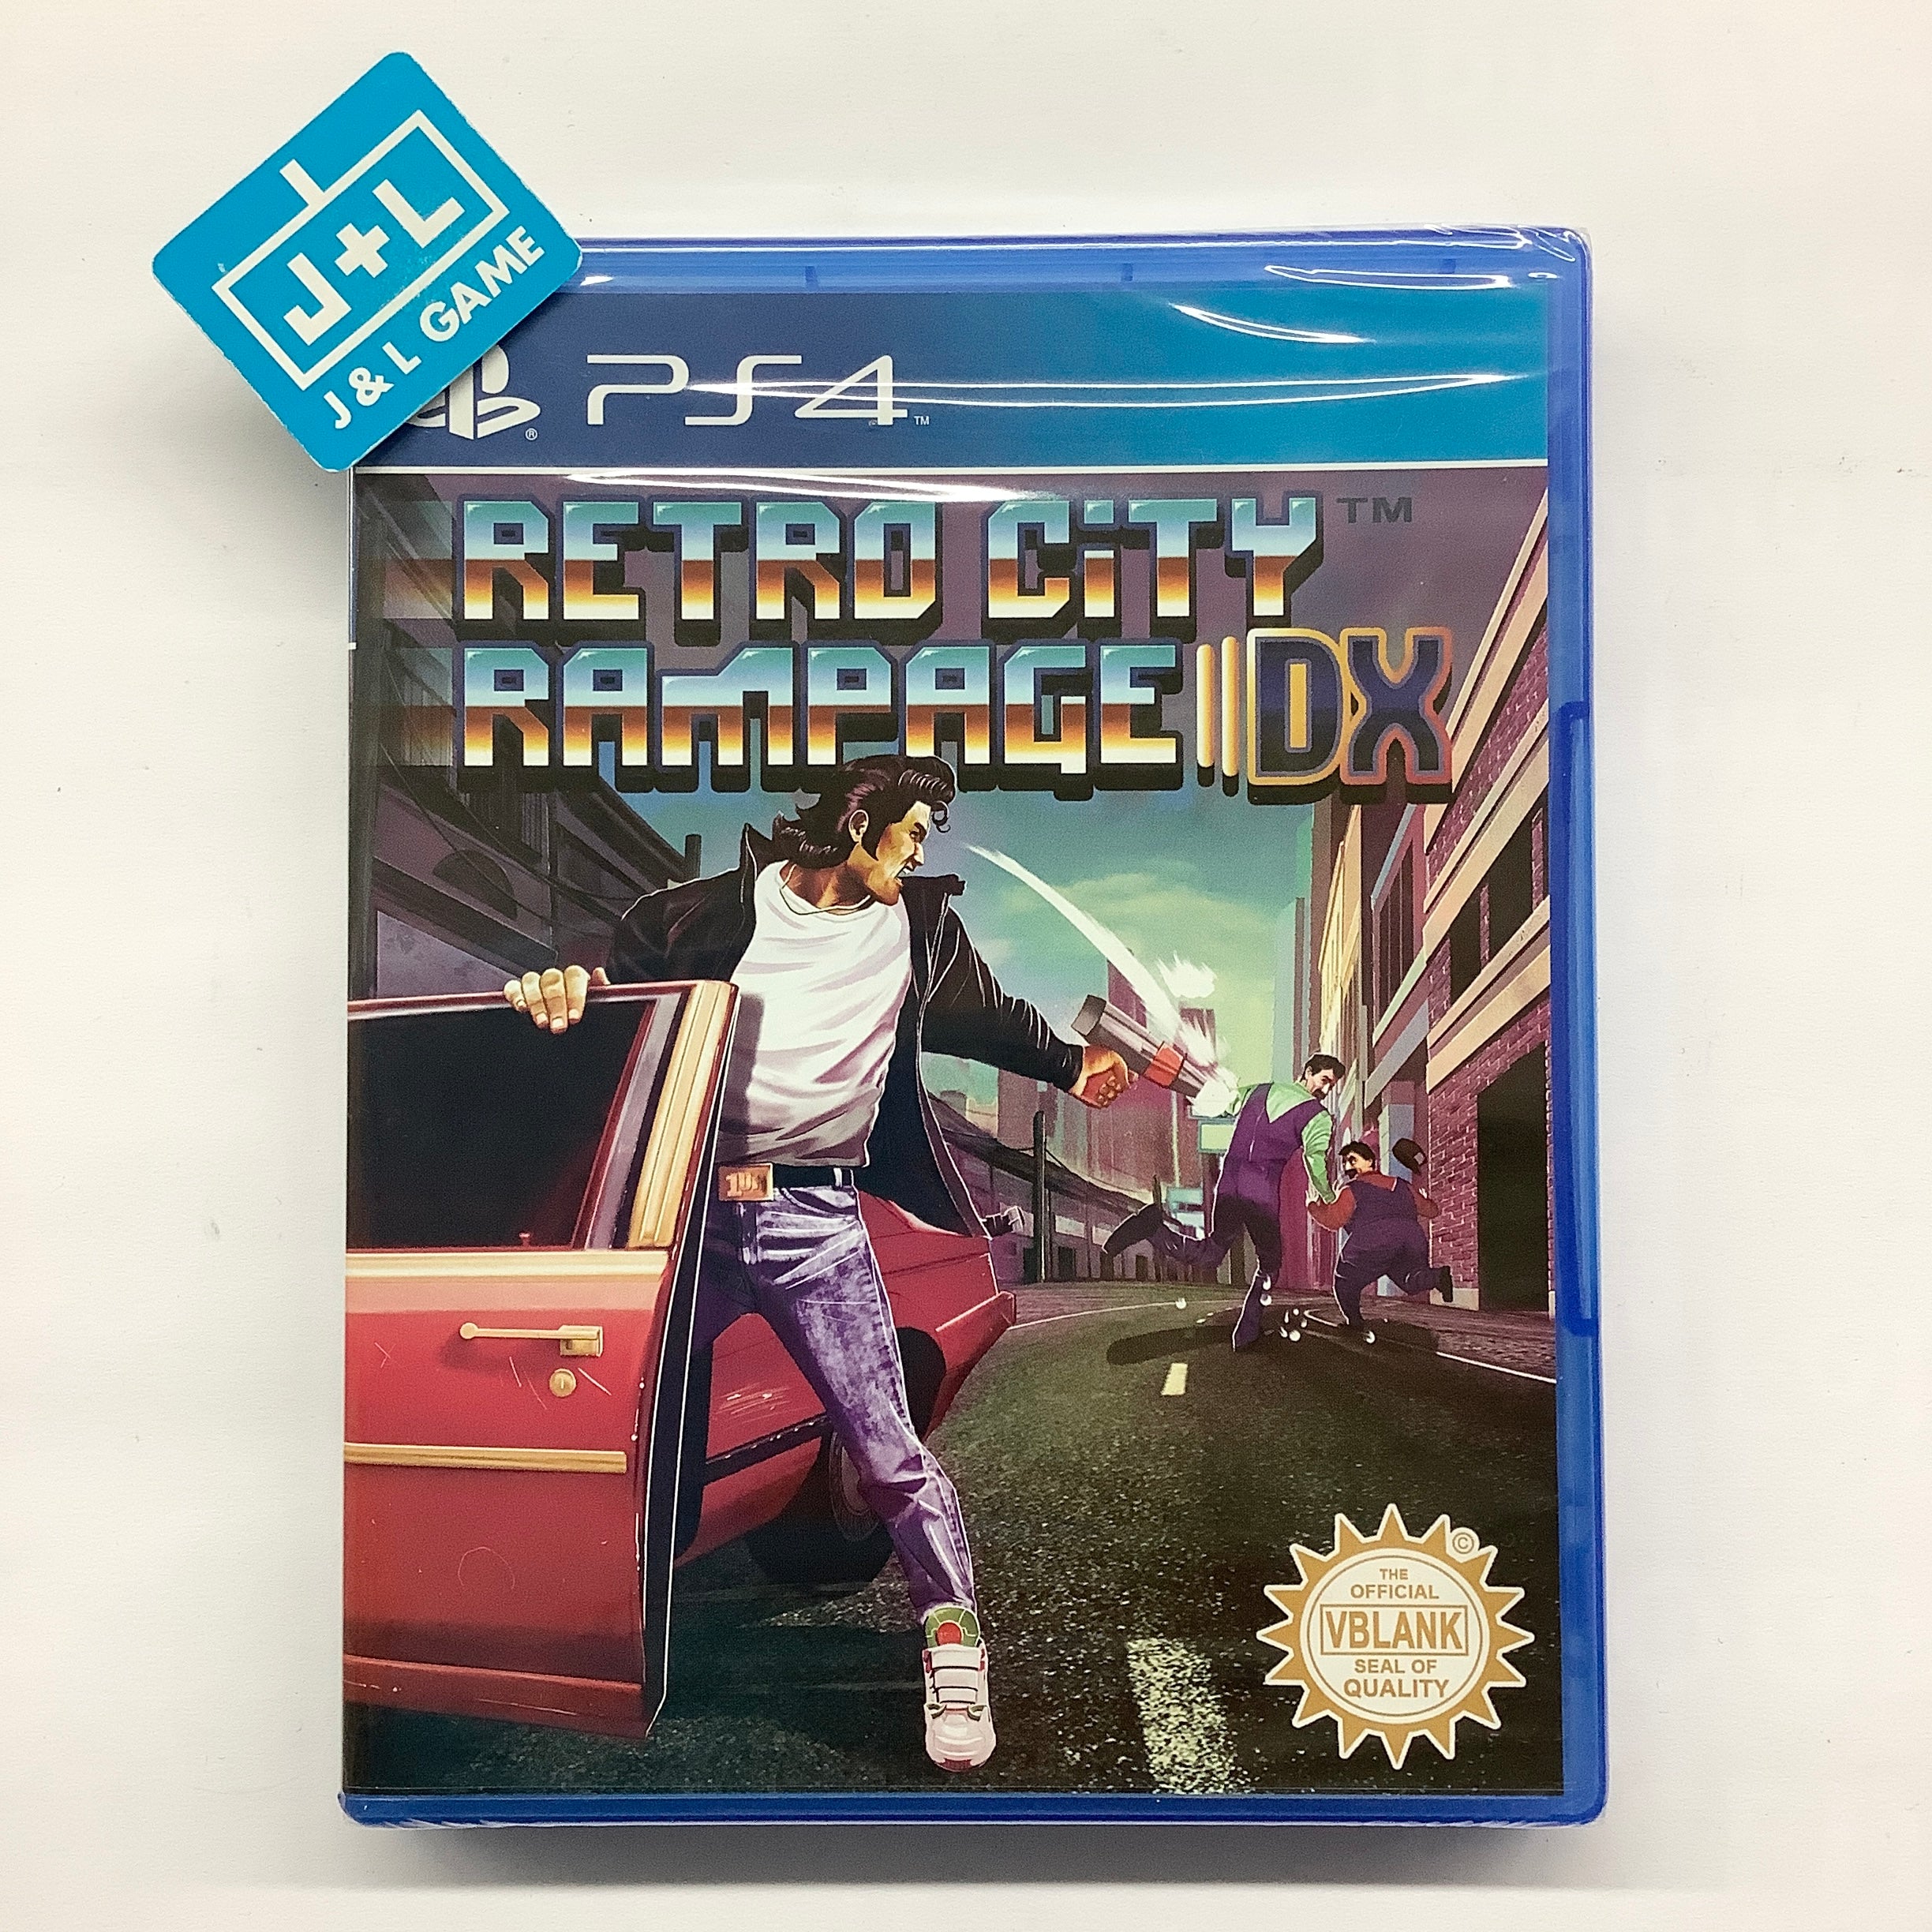 Retro City Rampage DX - (PS4) PlayStation 4 Video Games Vblank Entertainment Inc.   